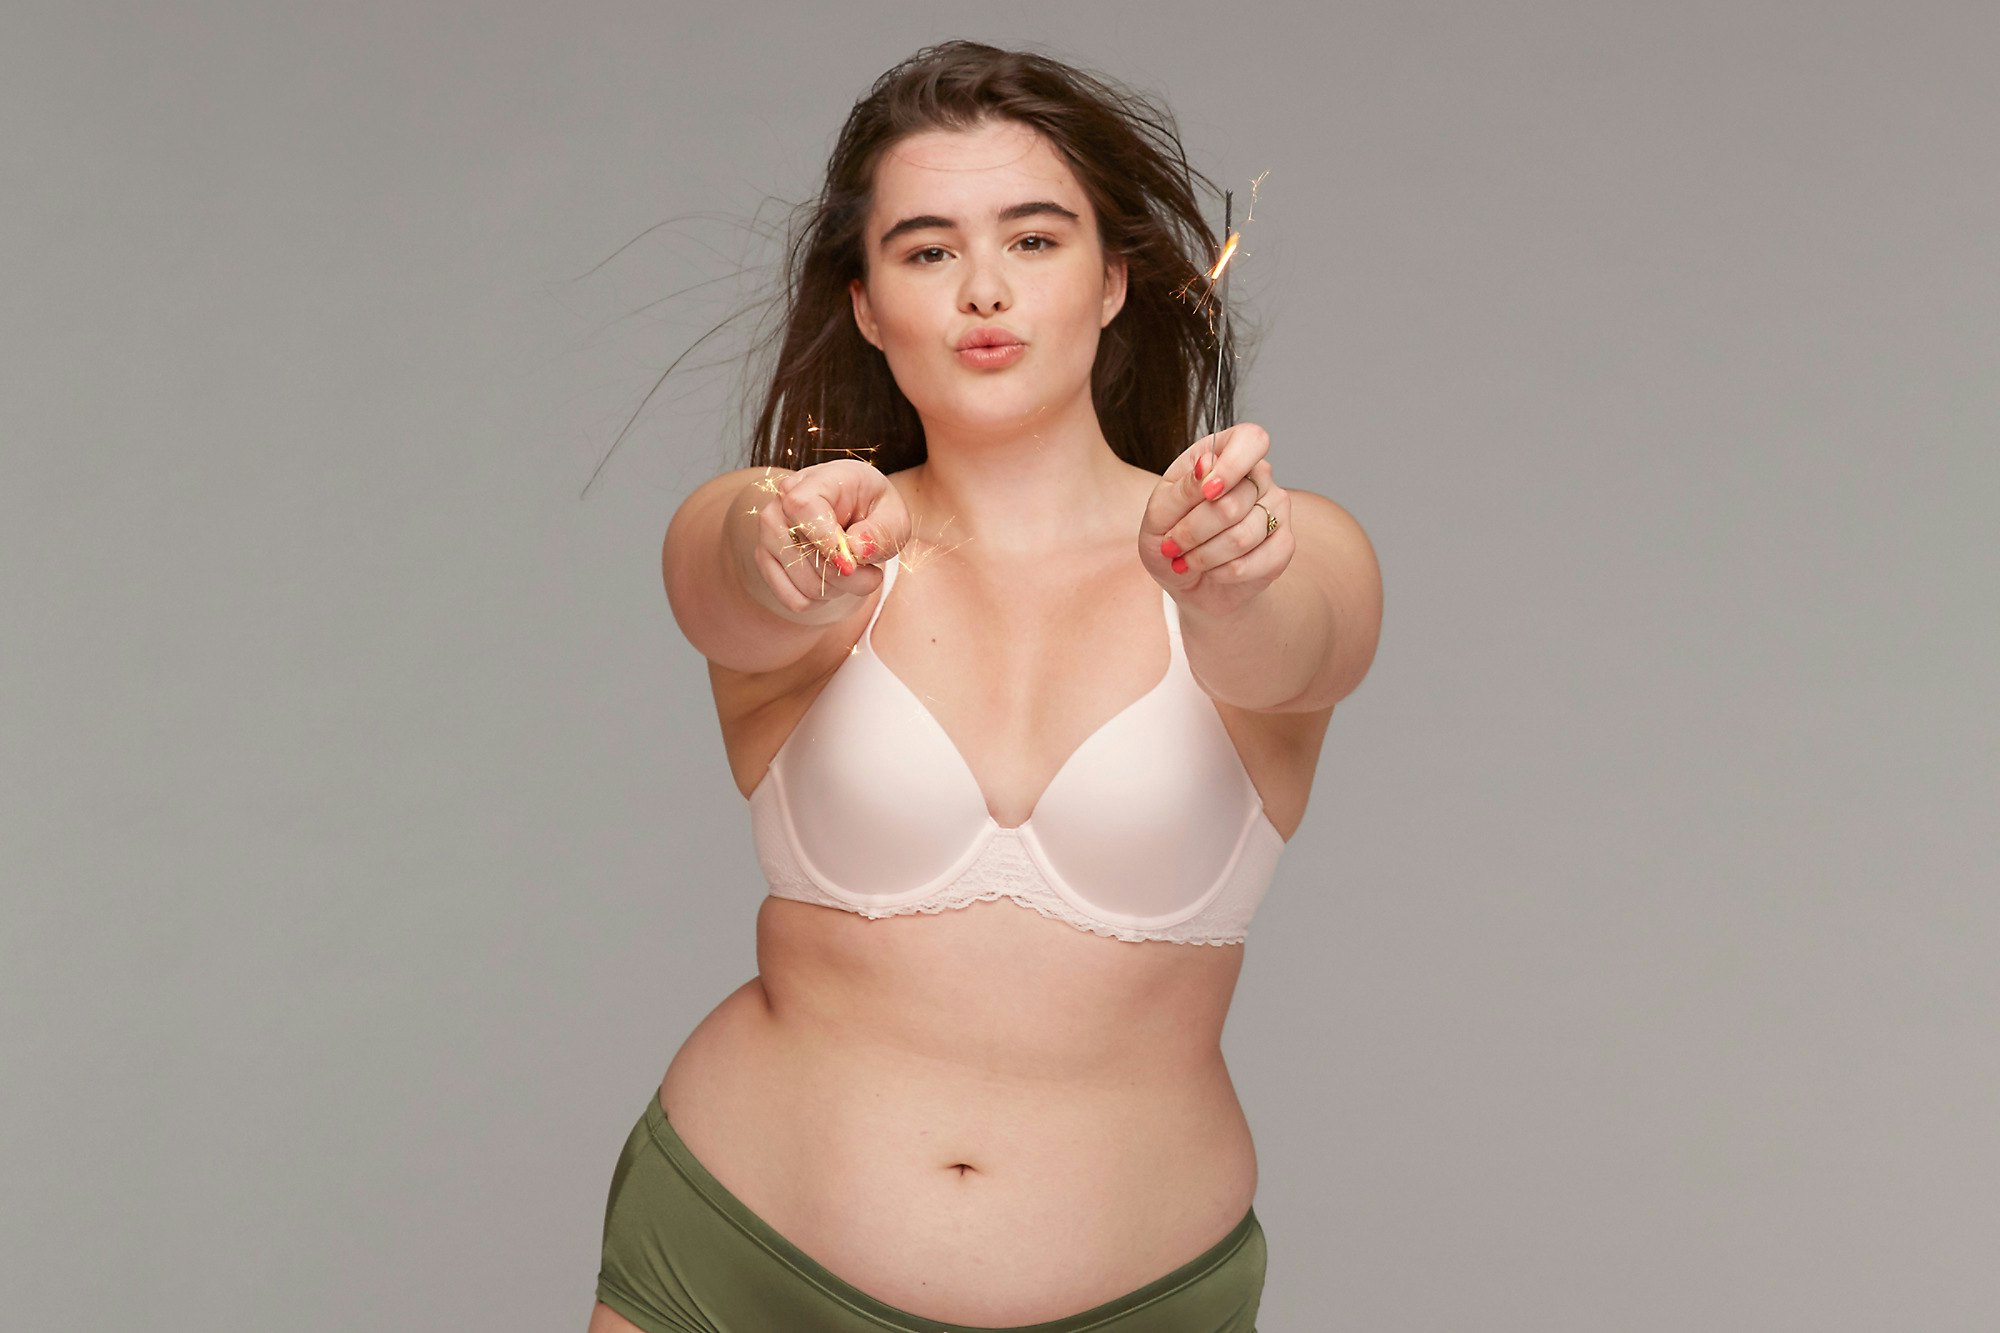 11 Bra Tips Every Woman With Small Boobs Should Know